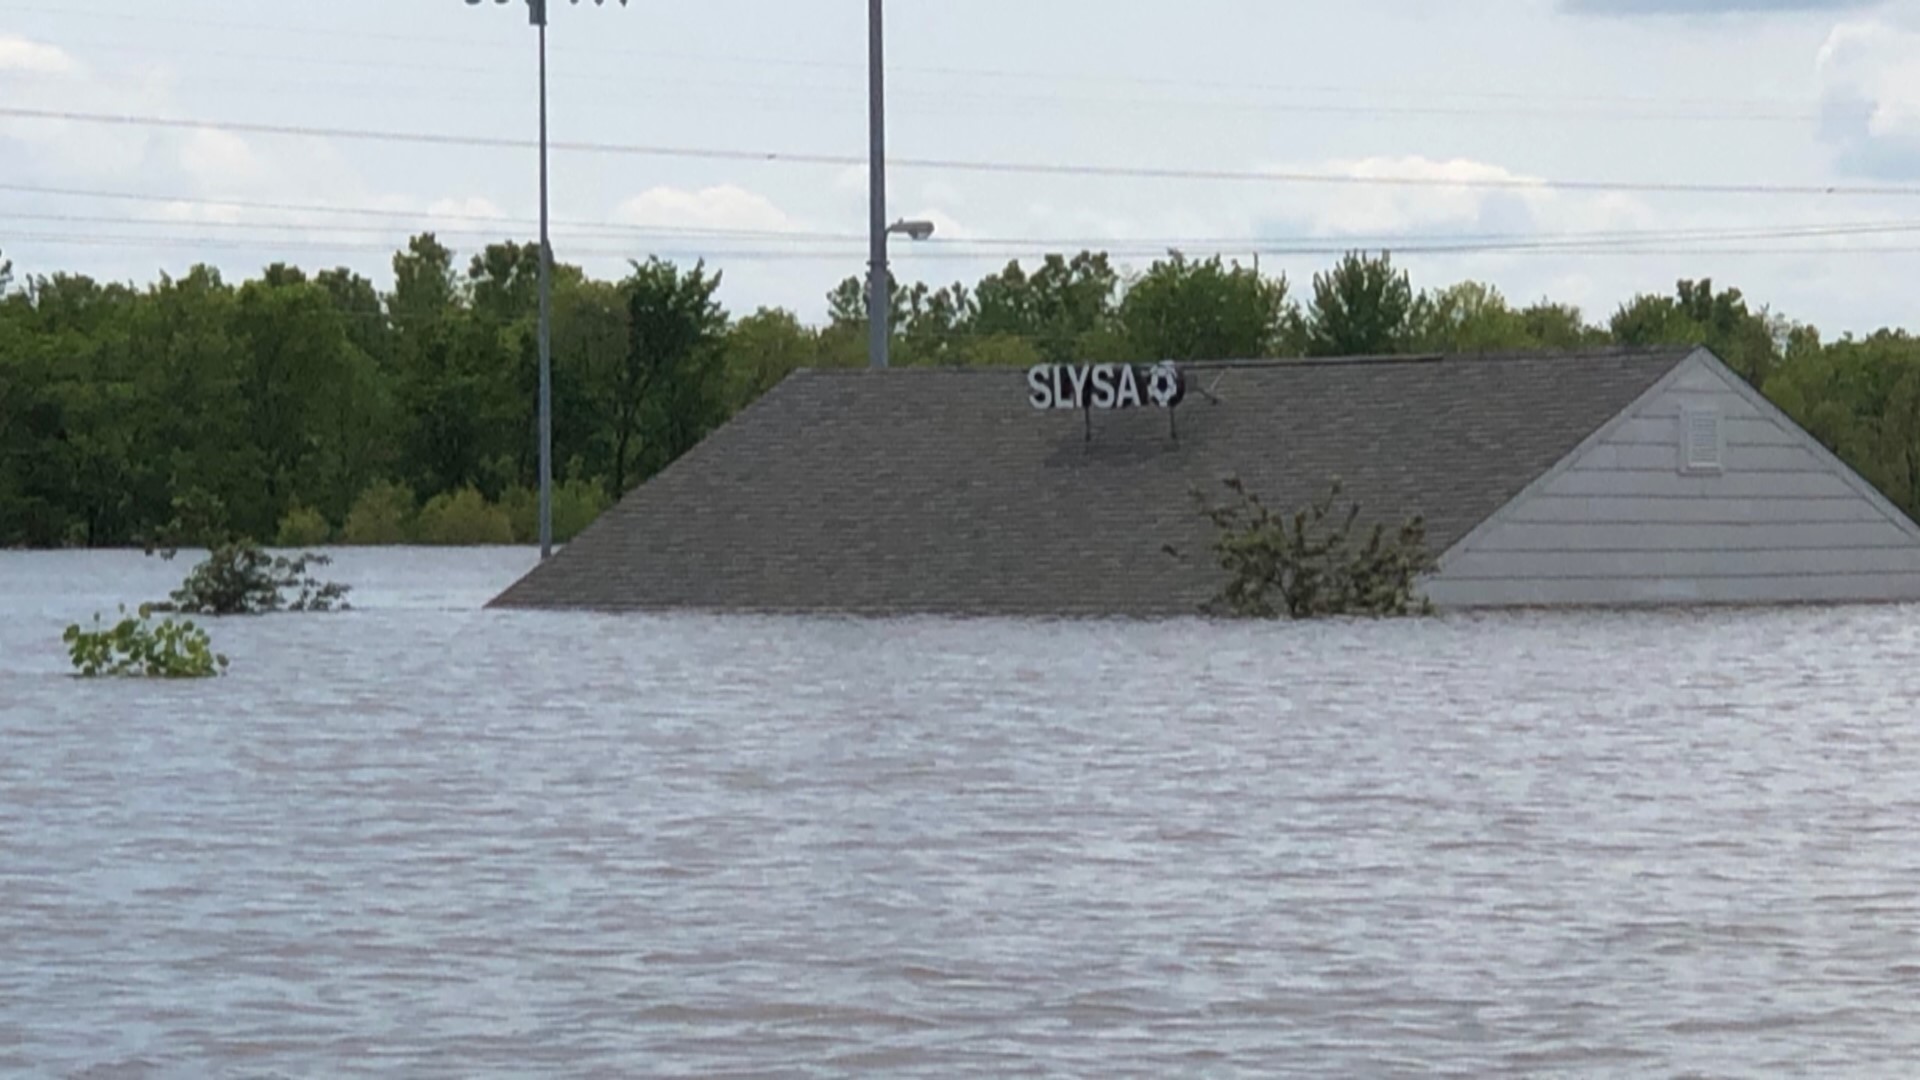 While some people are seeing the light at the end of the tunnel with receding floodwaters, the St. Louis Youth Soccer Association is looking at six to eight more weeks of flooded fields.